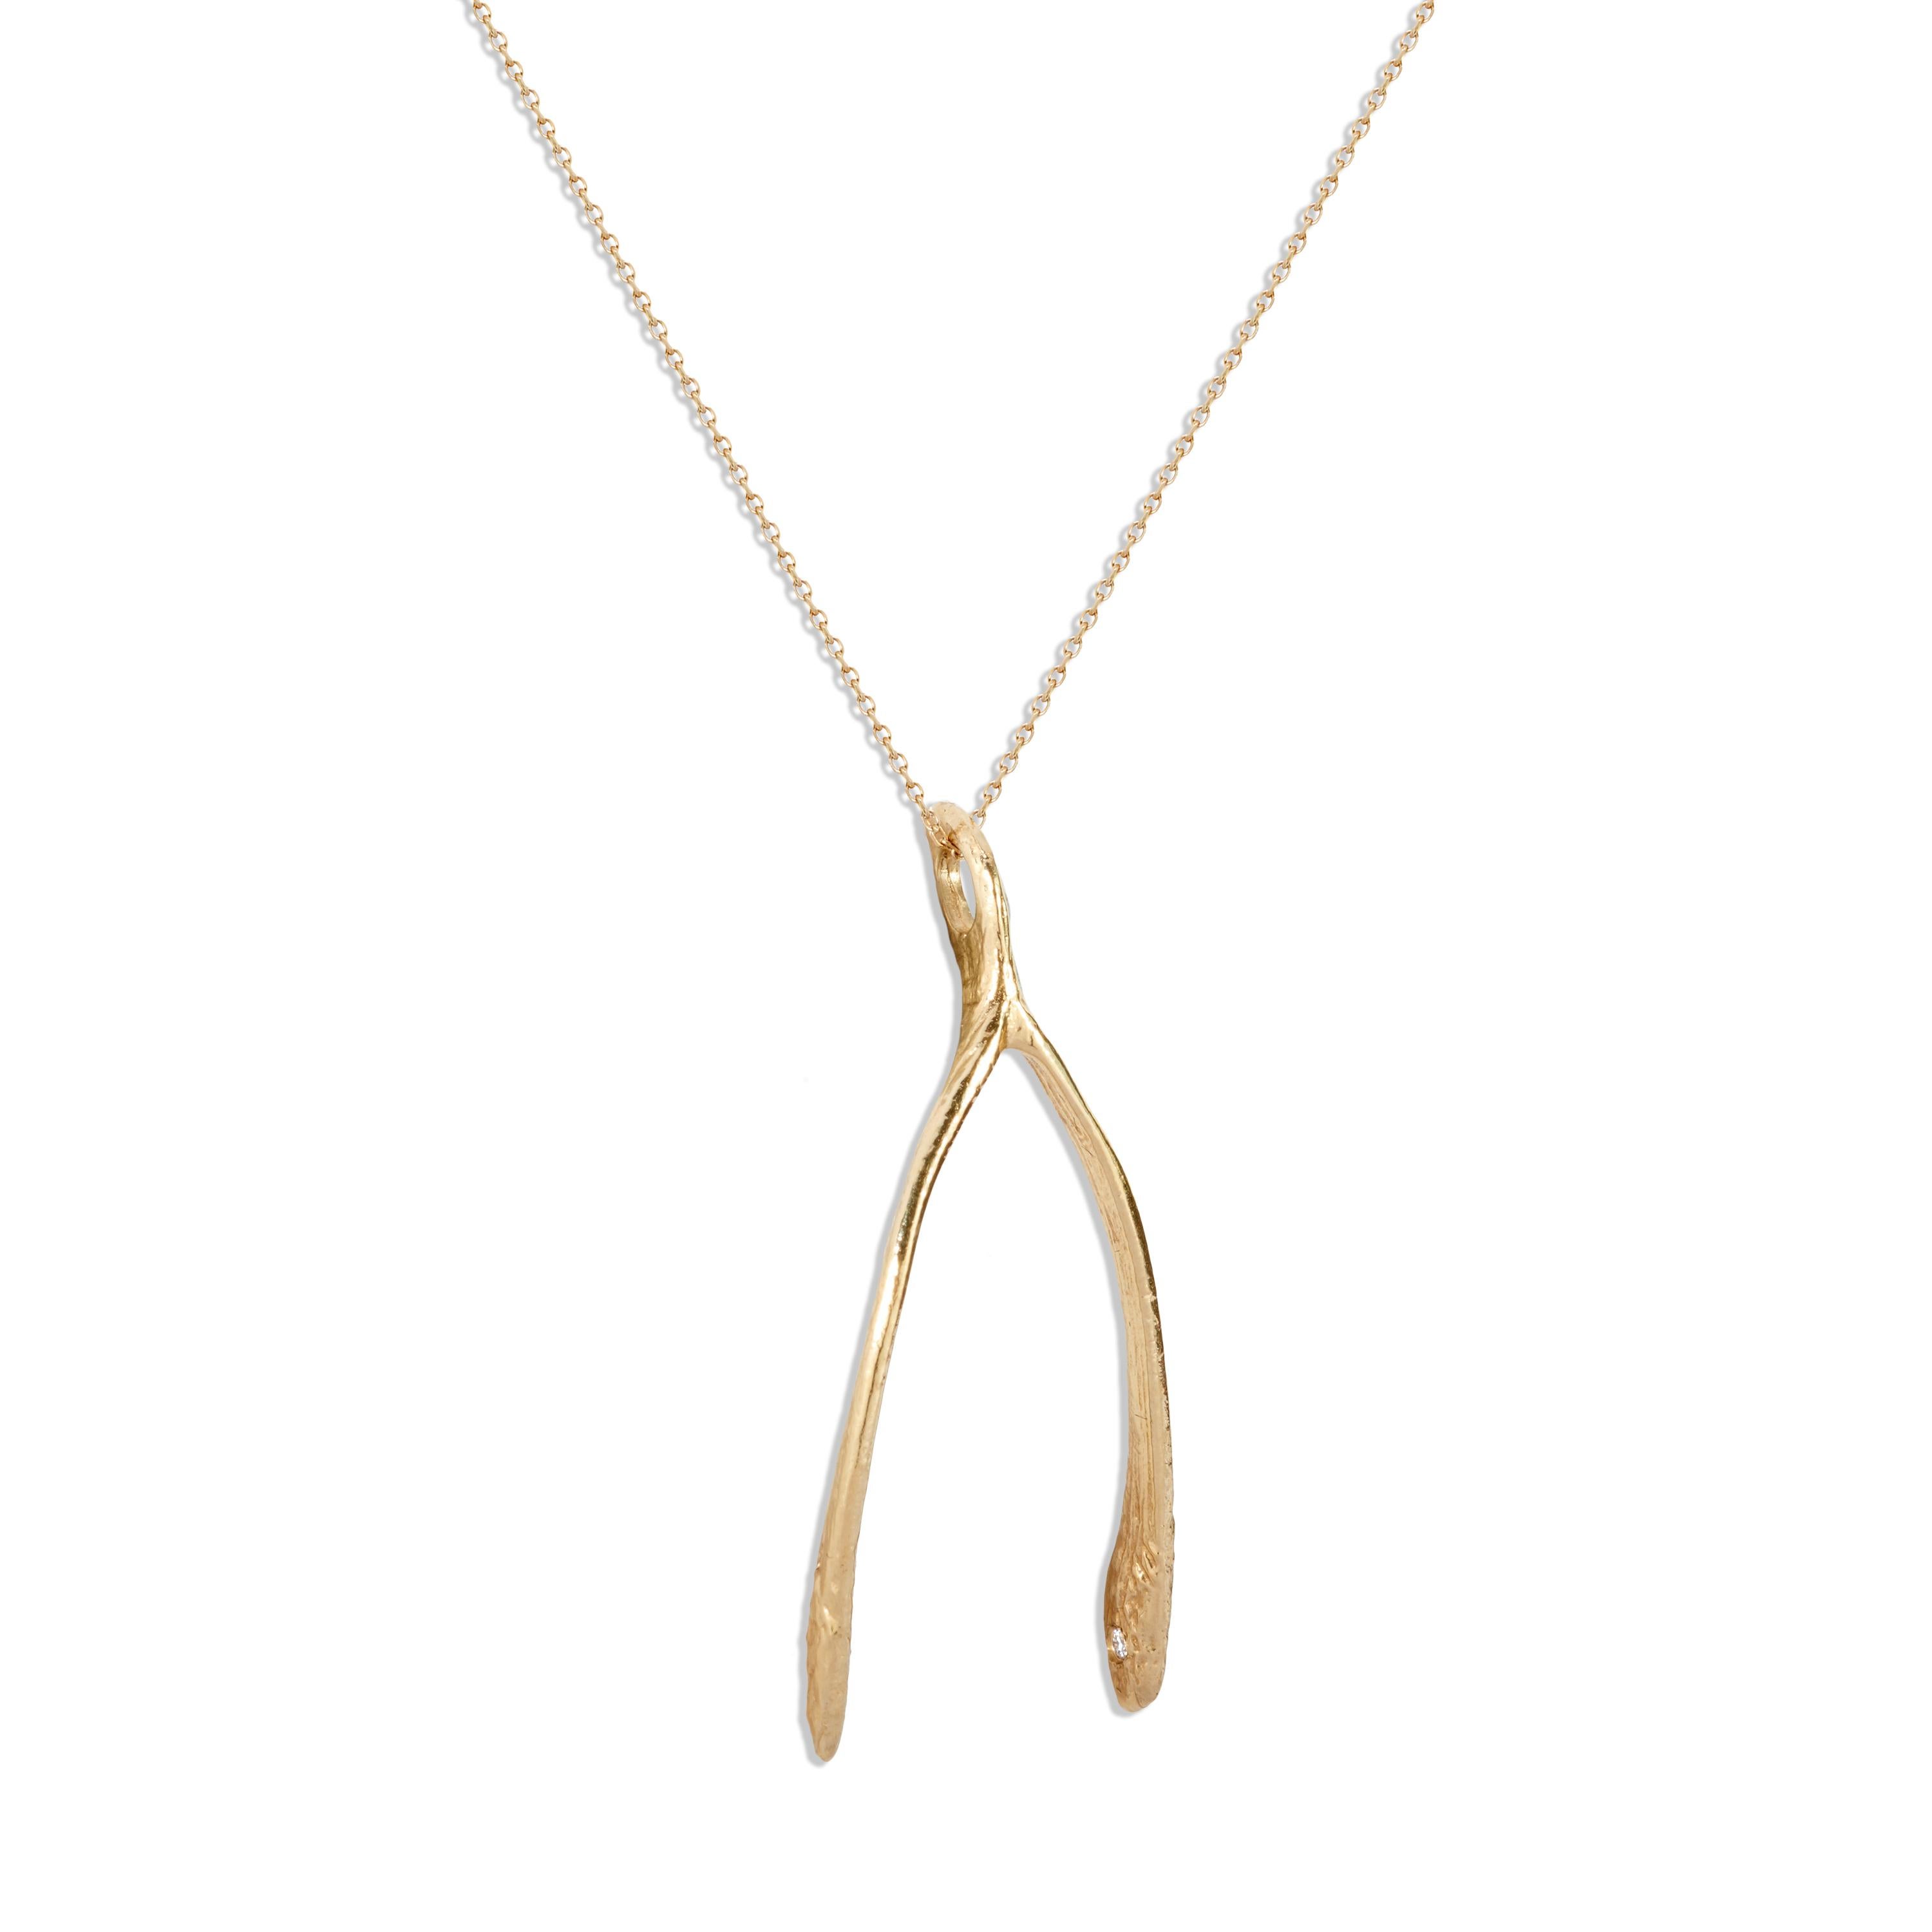 This 14k gold and white diamond wishbone pendant is a fun reminder of childhood and the ease with which wishes were once made. It is a substantial piece with an organic brushed look and feel.  The best part of this pendant is the 3 diamonds (2 mm)